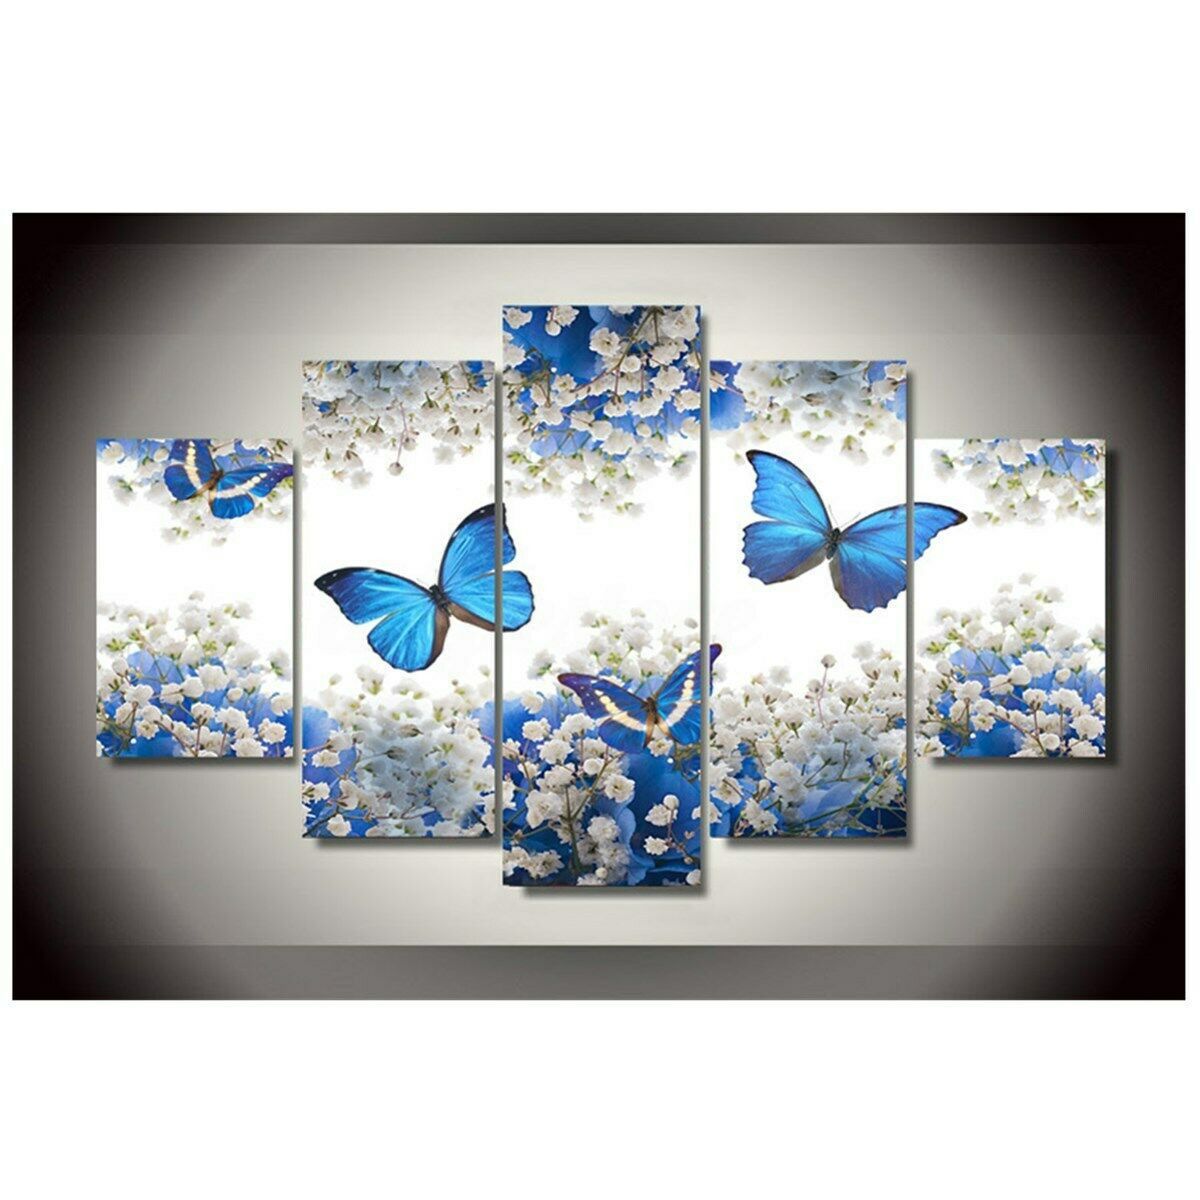 NEW Wall Art Blue Butterfly Canvas Painting for Home decoration bedroom living room Hallway office